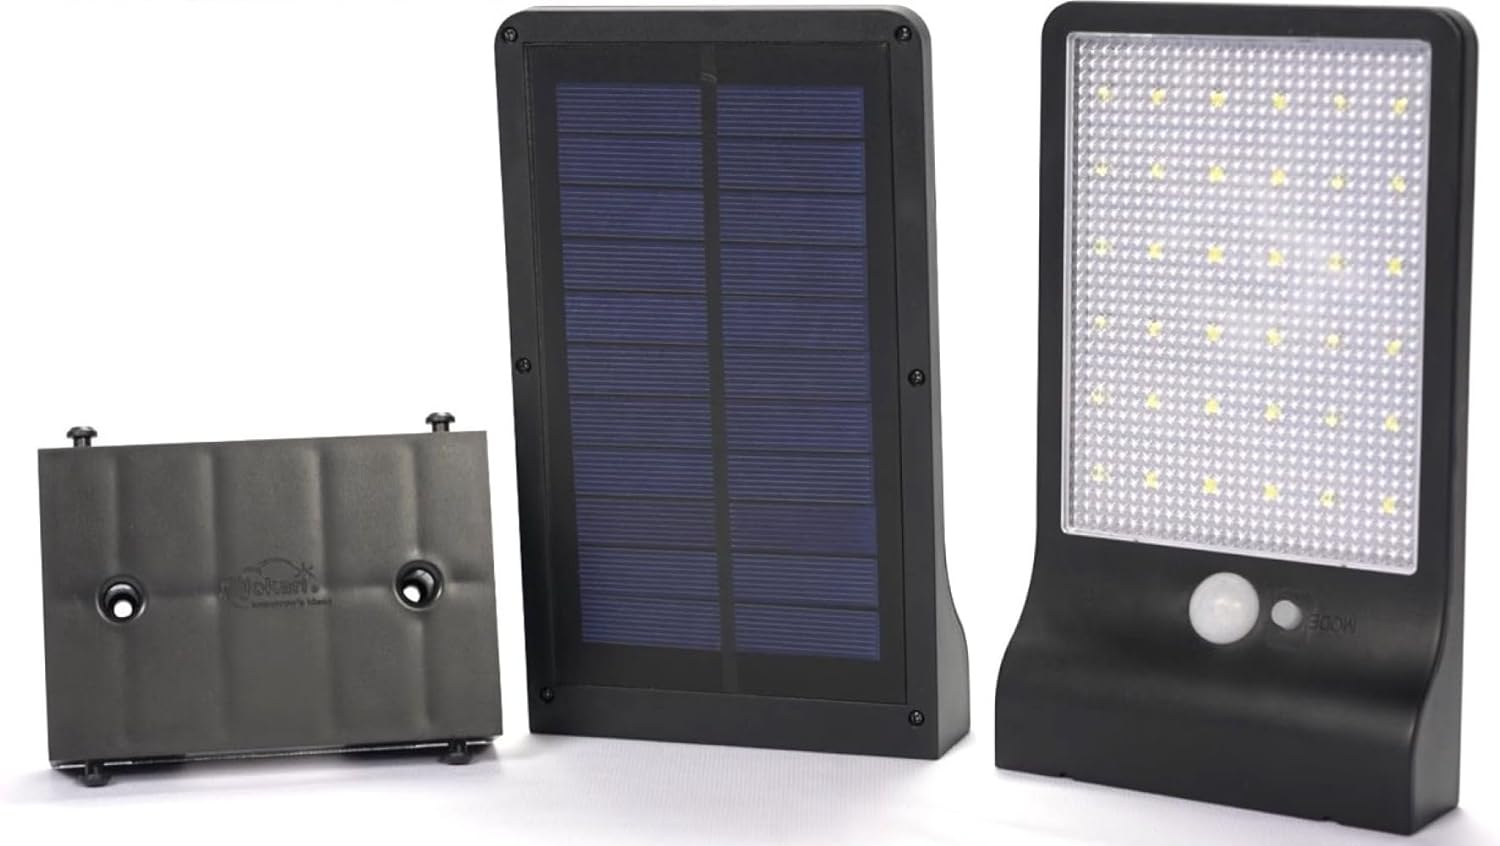 jokari solar powered motion activated walkway and sign illuminators 2 pack efficiently light up paths or signage with ec